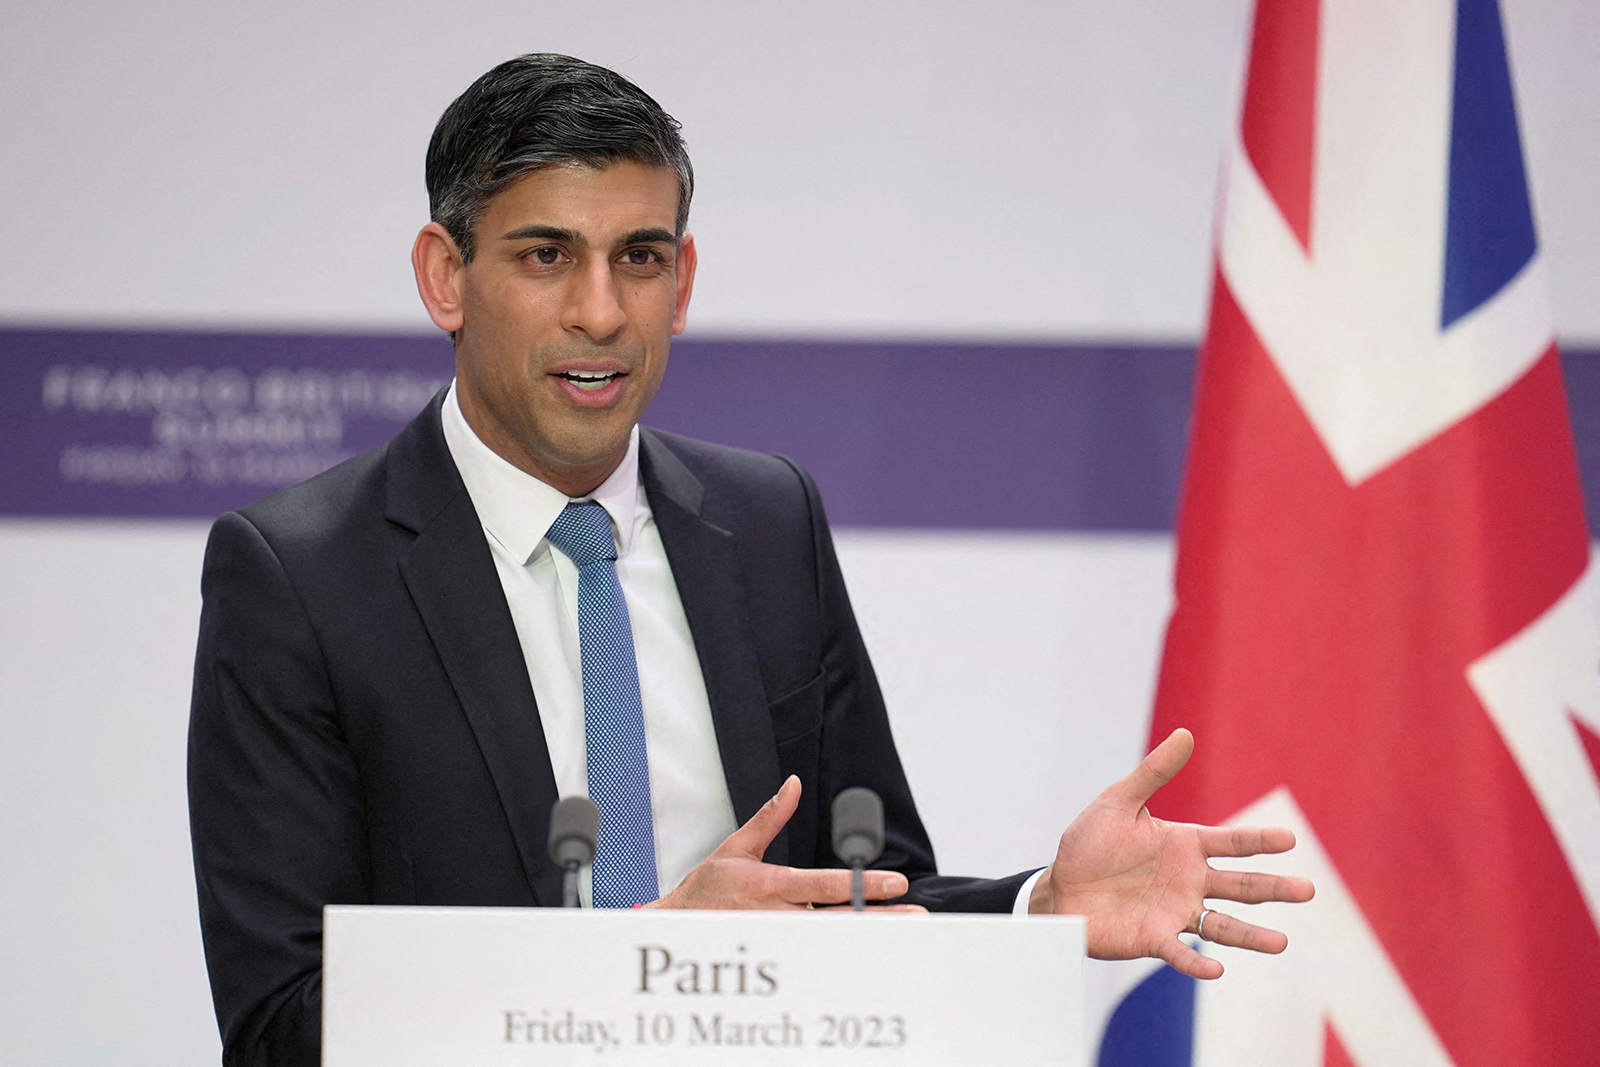 Rishi Sunak speaks during a news conference in Paris, France, on March 10.